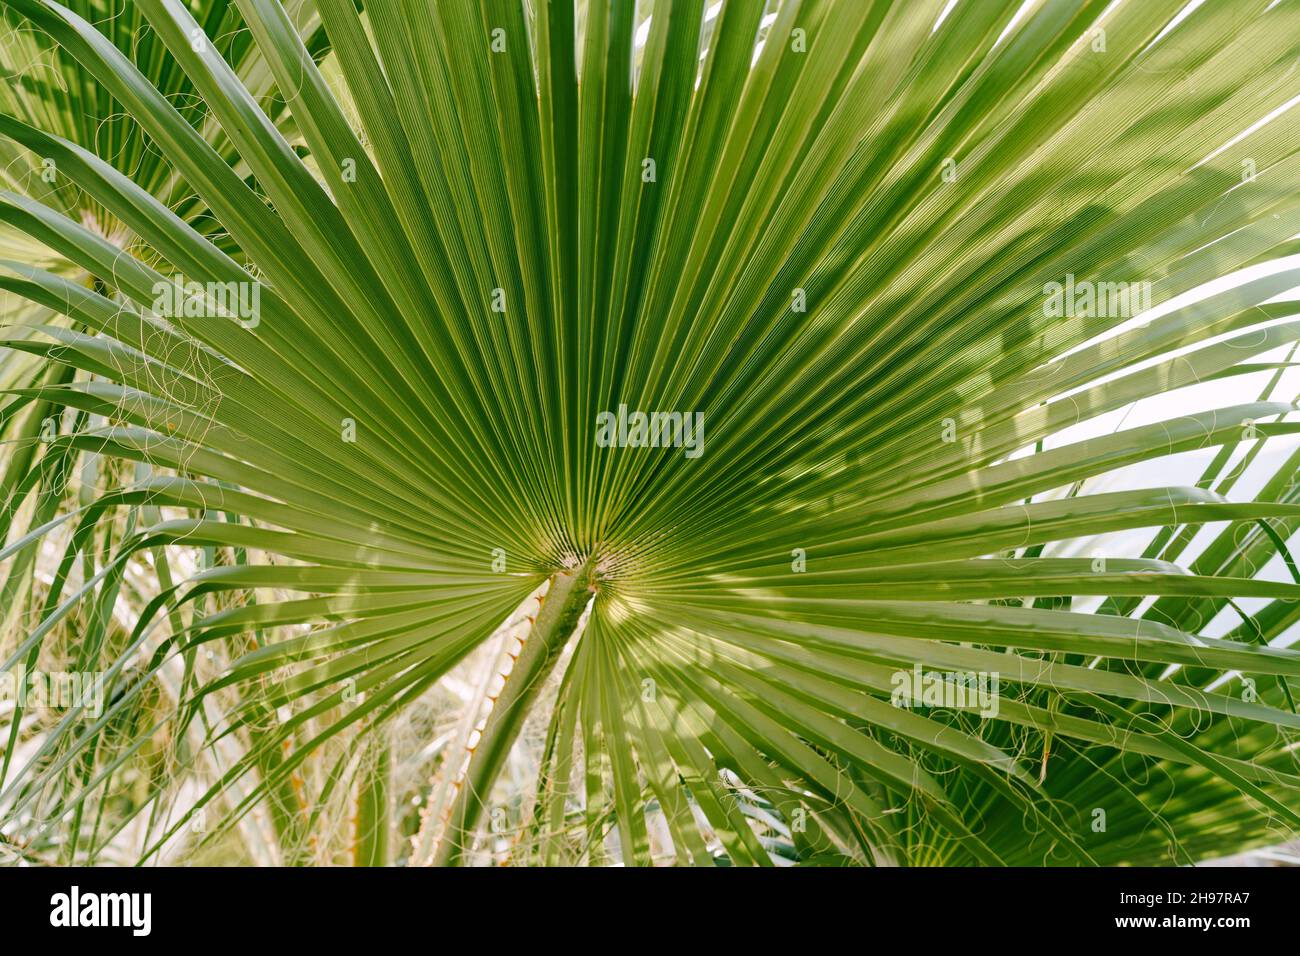 Green saber-shaped sabal palm leaf with threads Stock Photo